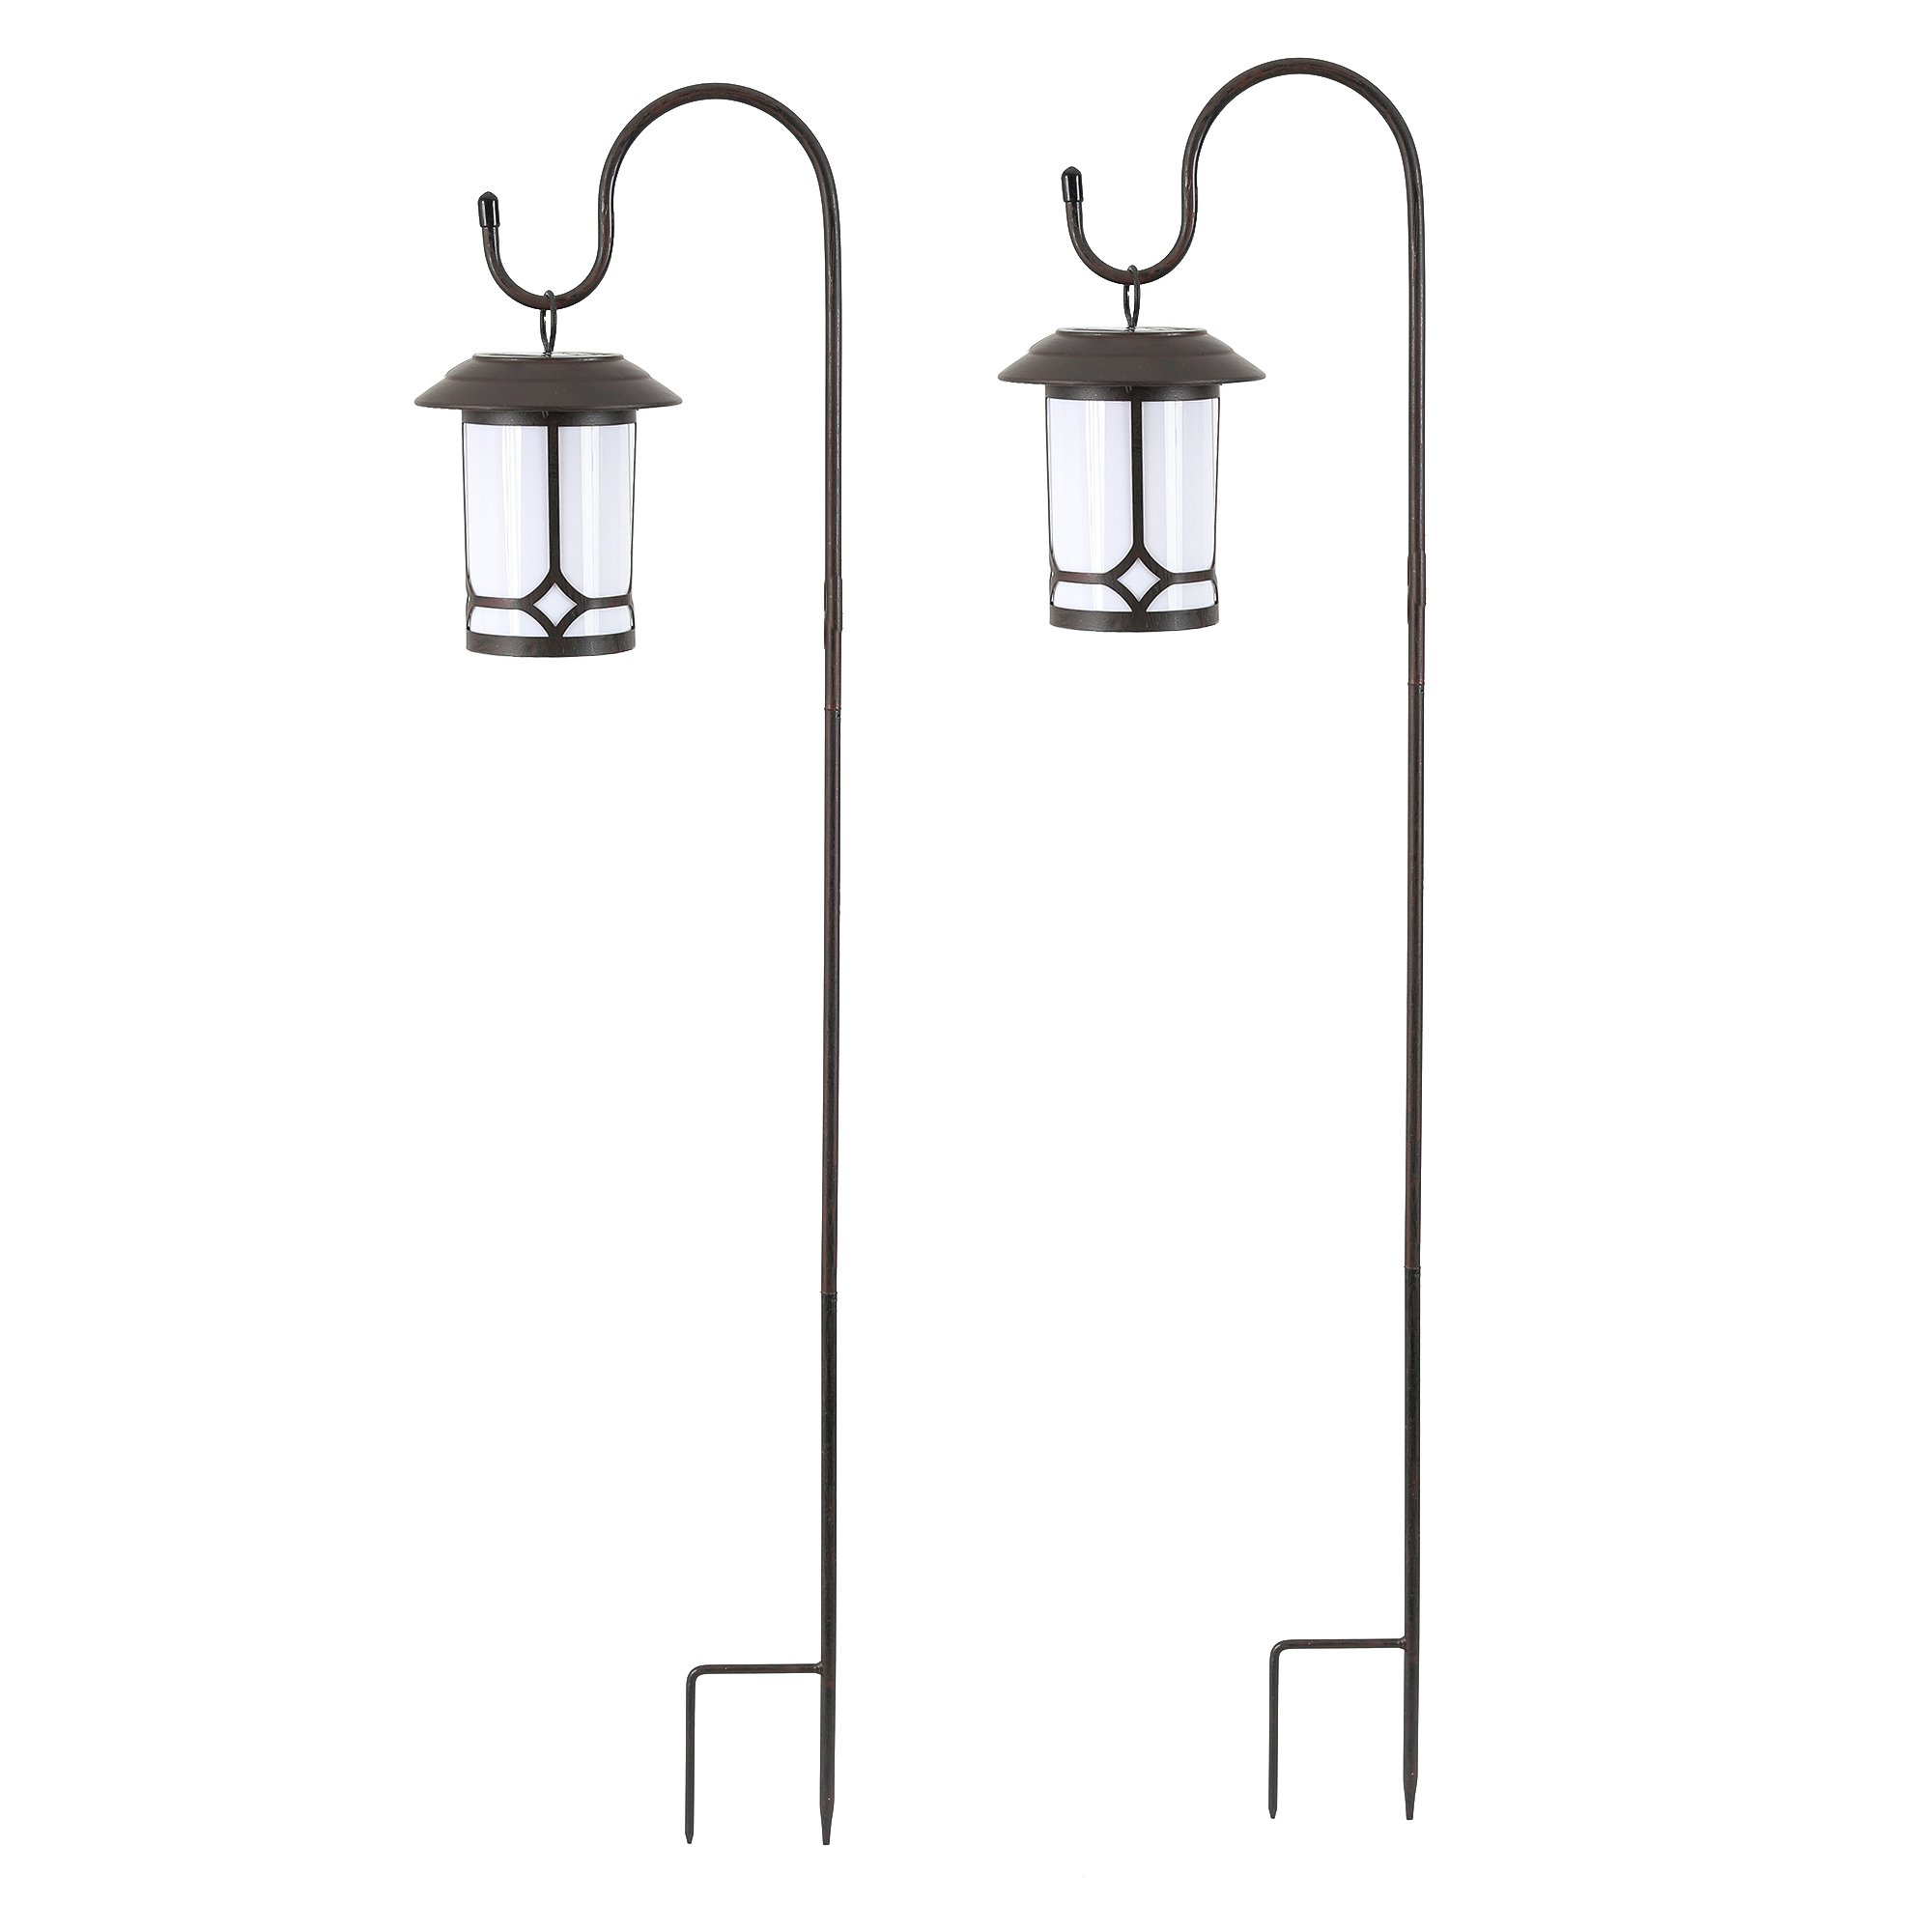 Wh079 Classical Hanging Solar Lanterns With Shepherd Hooks - Set Of 2